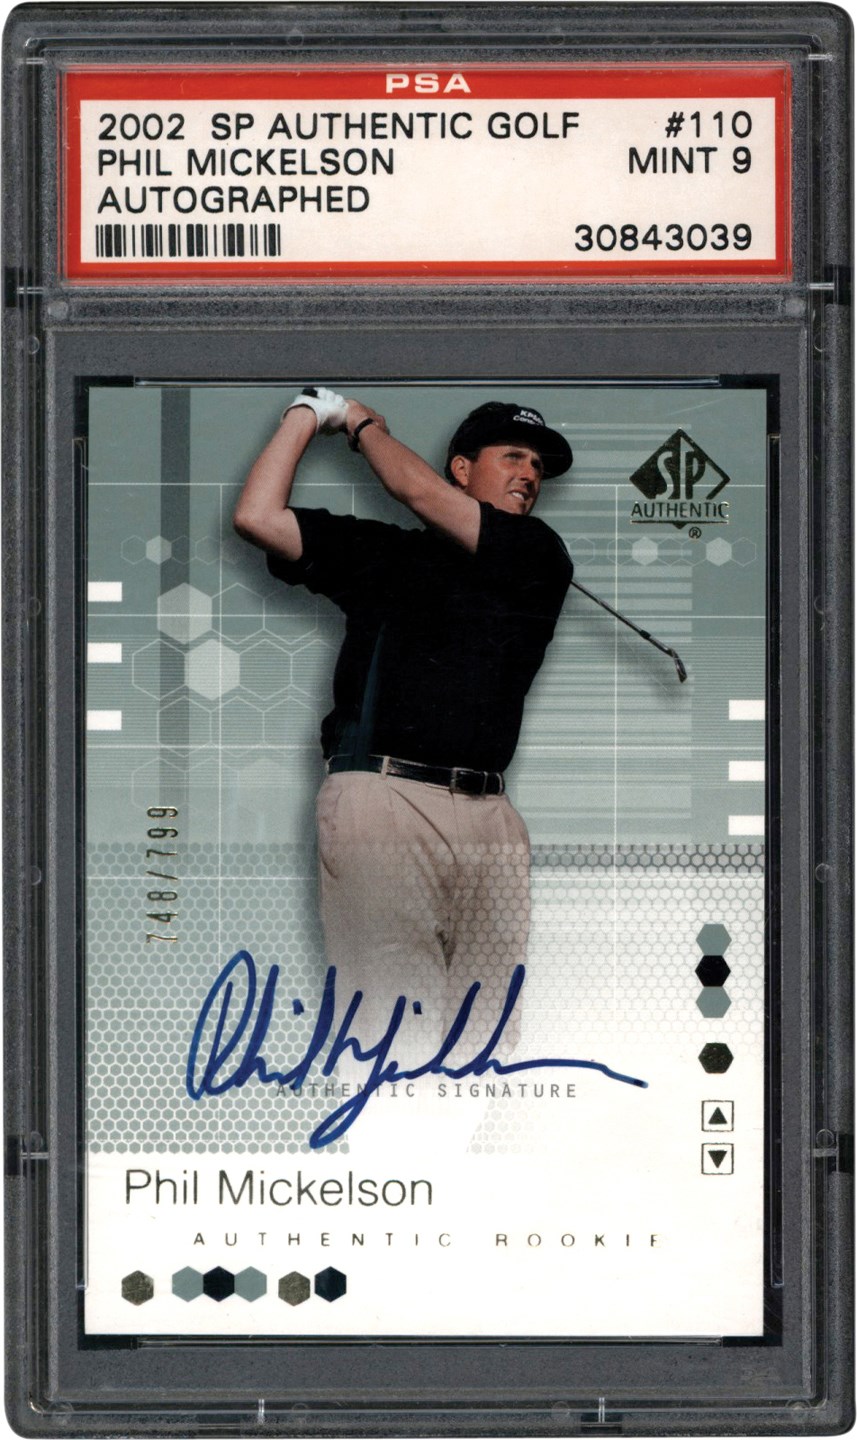 Modern Sports Cards - 2002 Upper Deck SP Authentic Golf #110 Phil Mickelson Rookie Autograph Card #748/799 PSA MINT 9